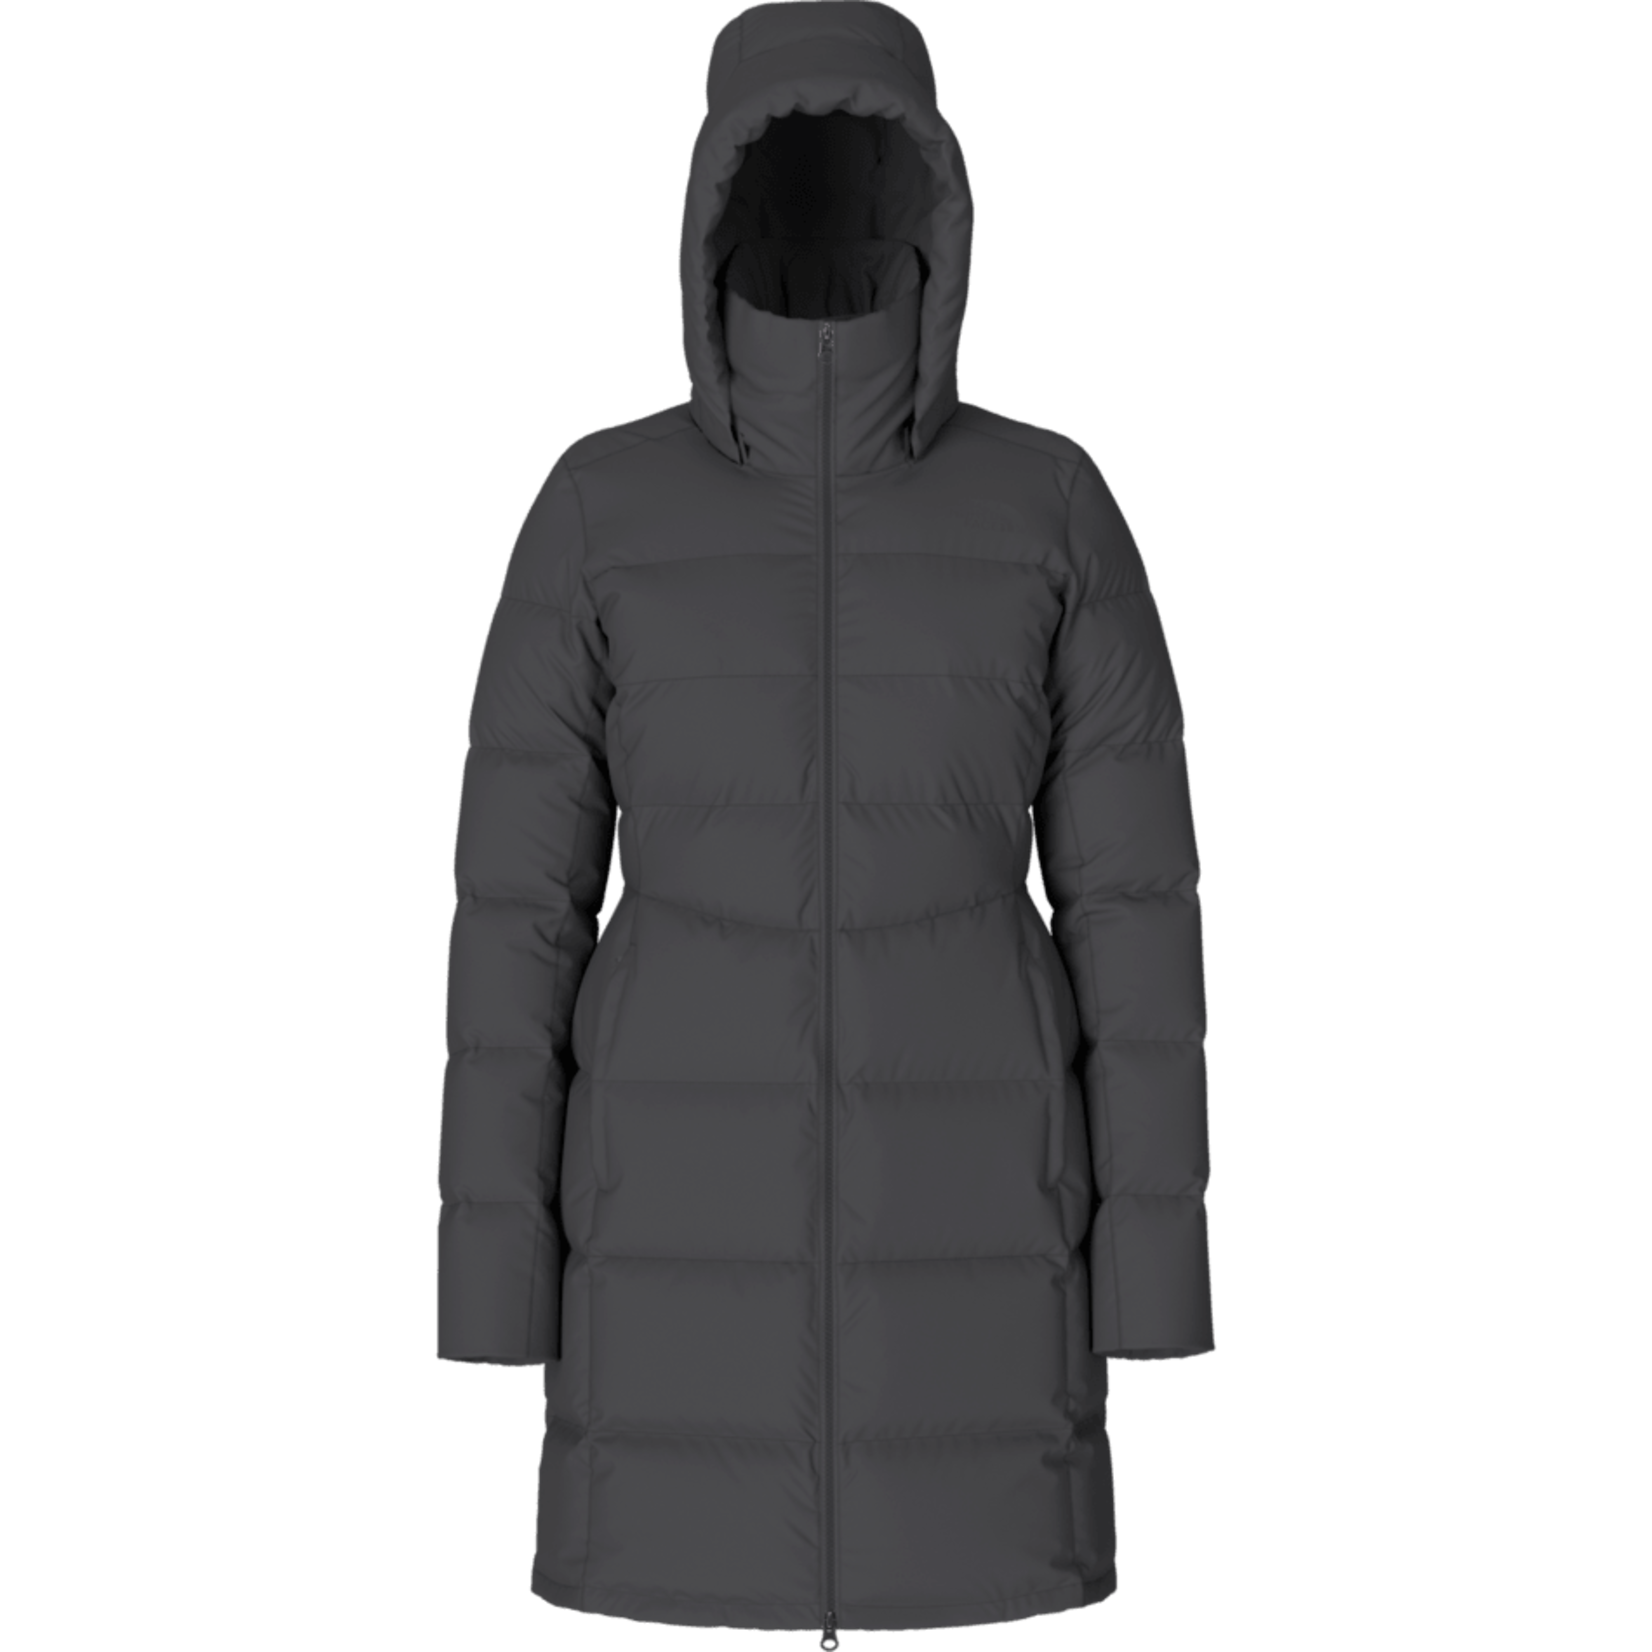 The North Face The North Face Women's Metropolis Parka